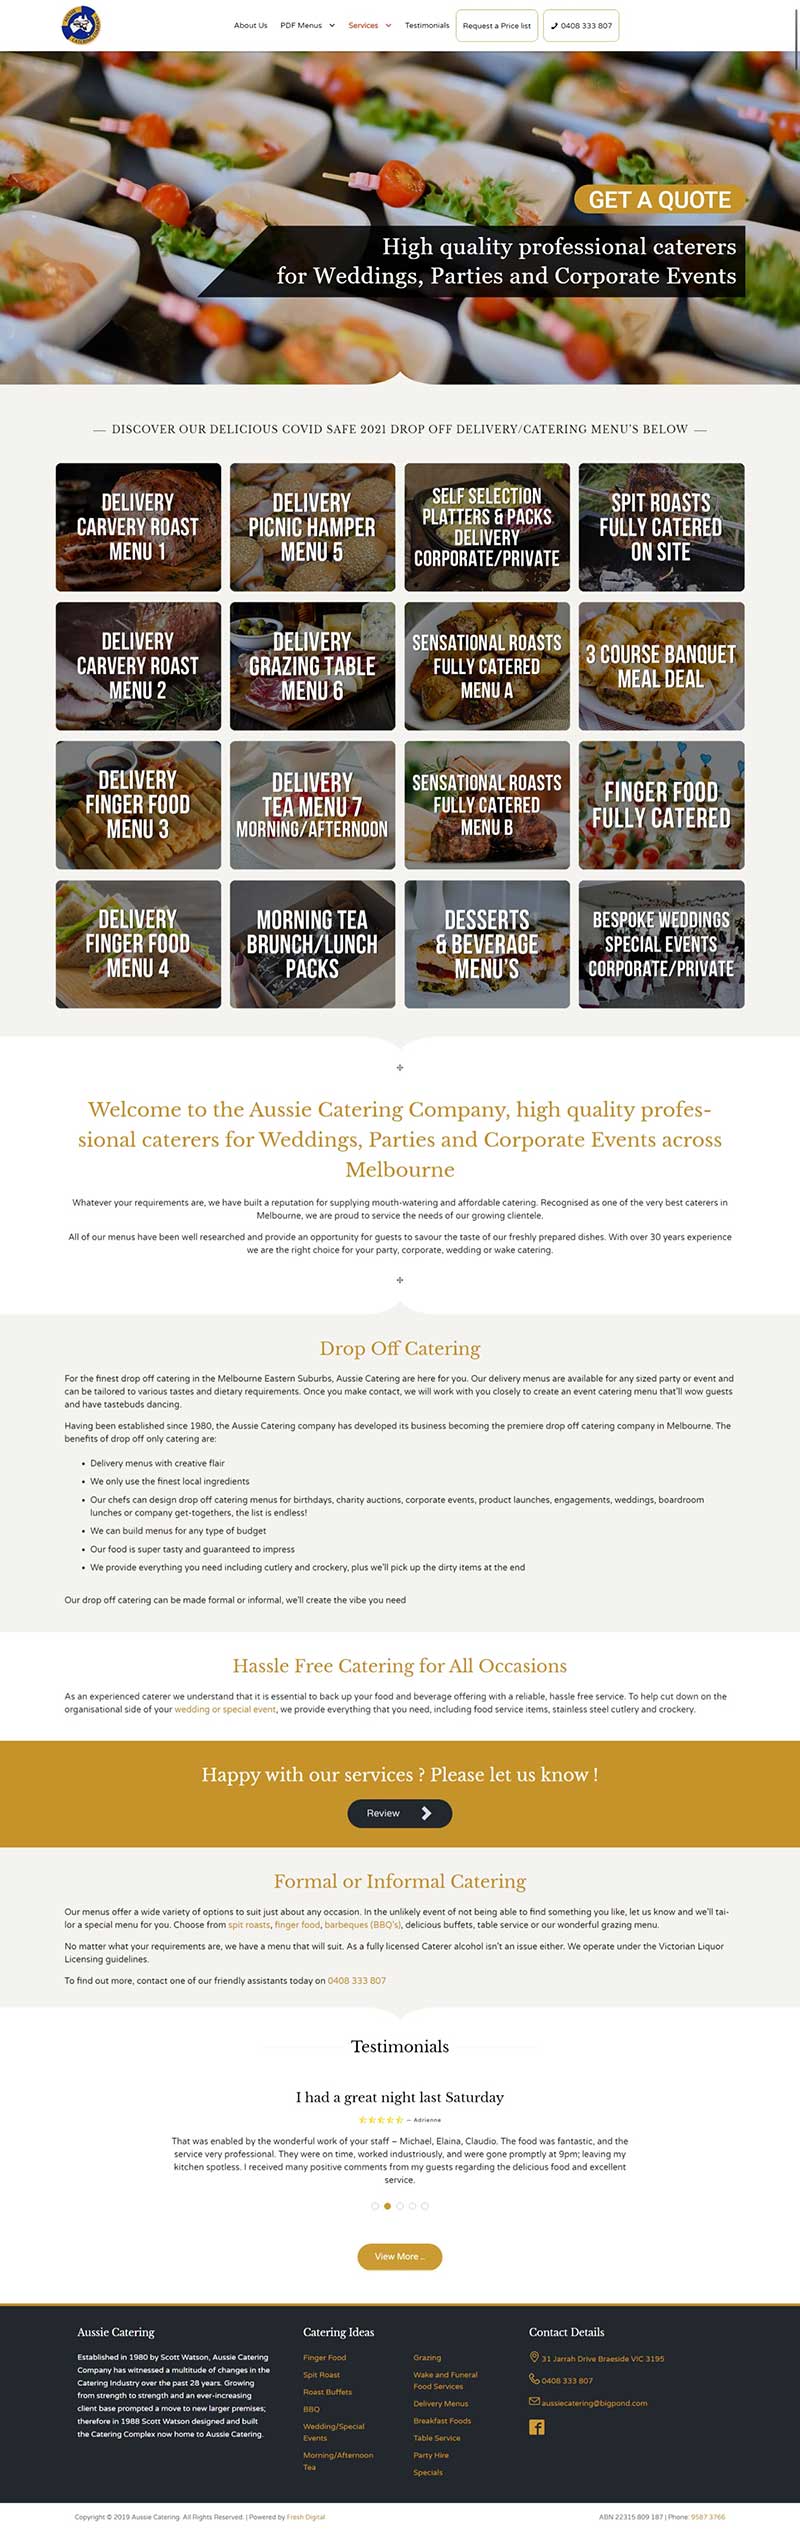 Aussie Catering Melbourne homepage